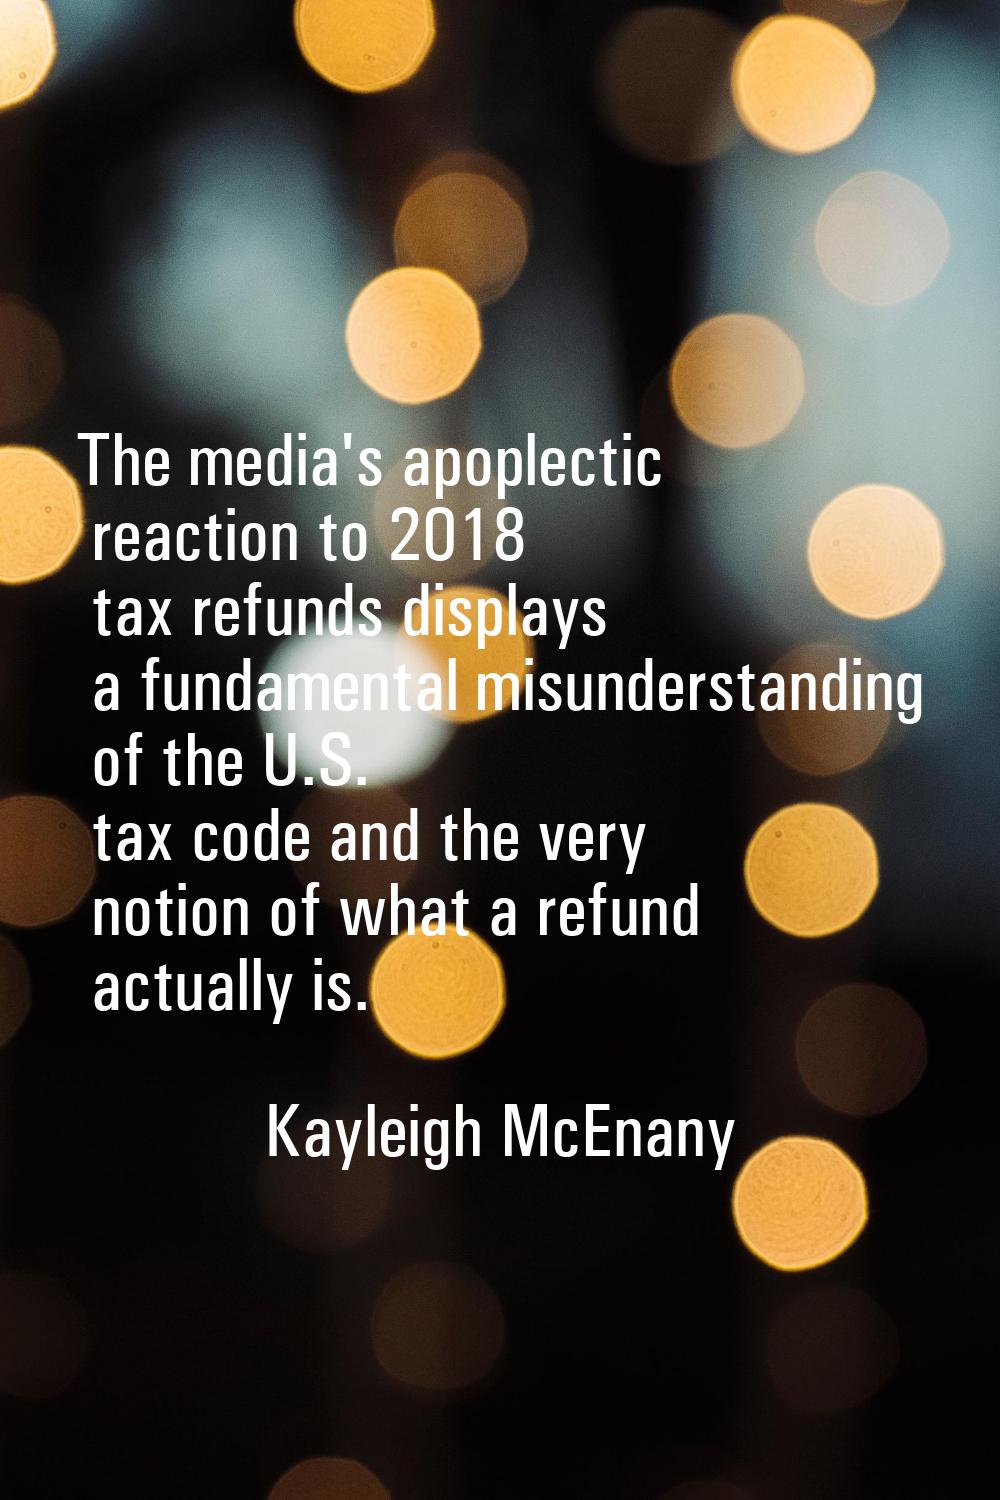 The media's apoplectic reaction to 2018 tax refunds displays a fundamental misunderstanding of the 